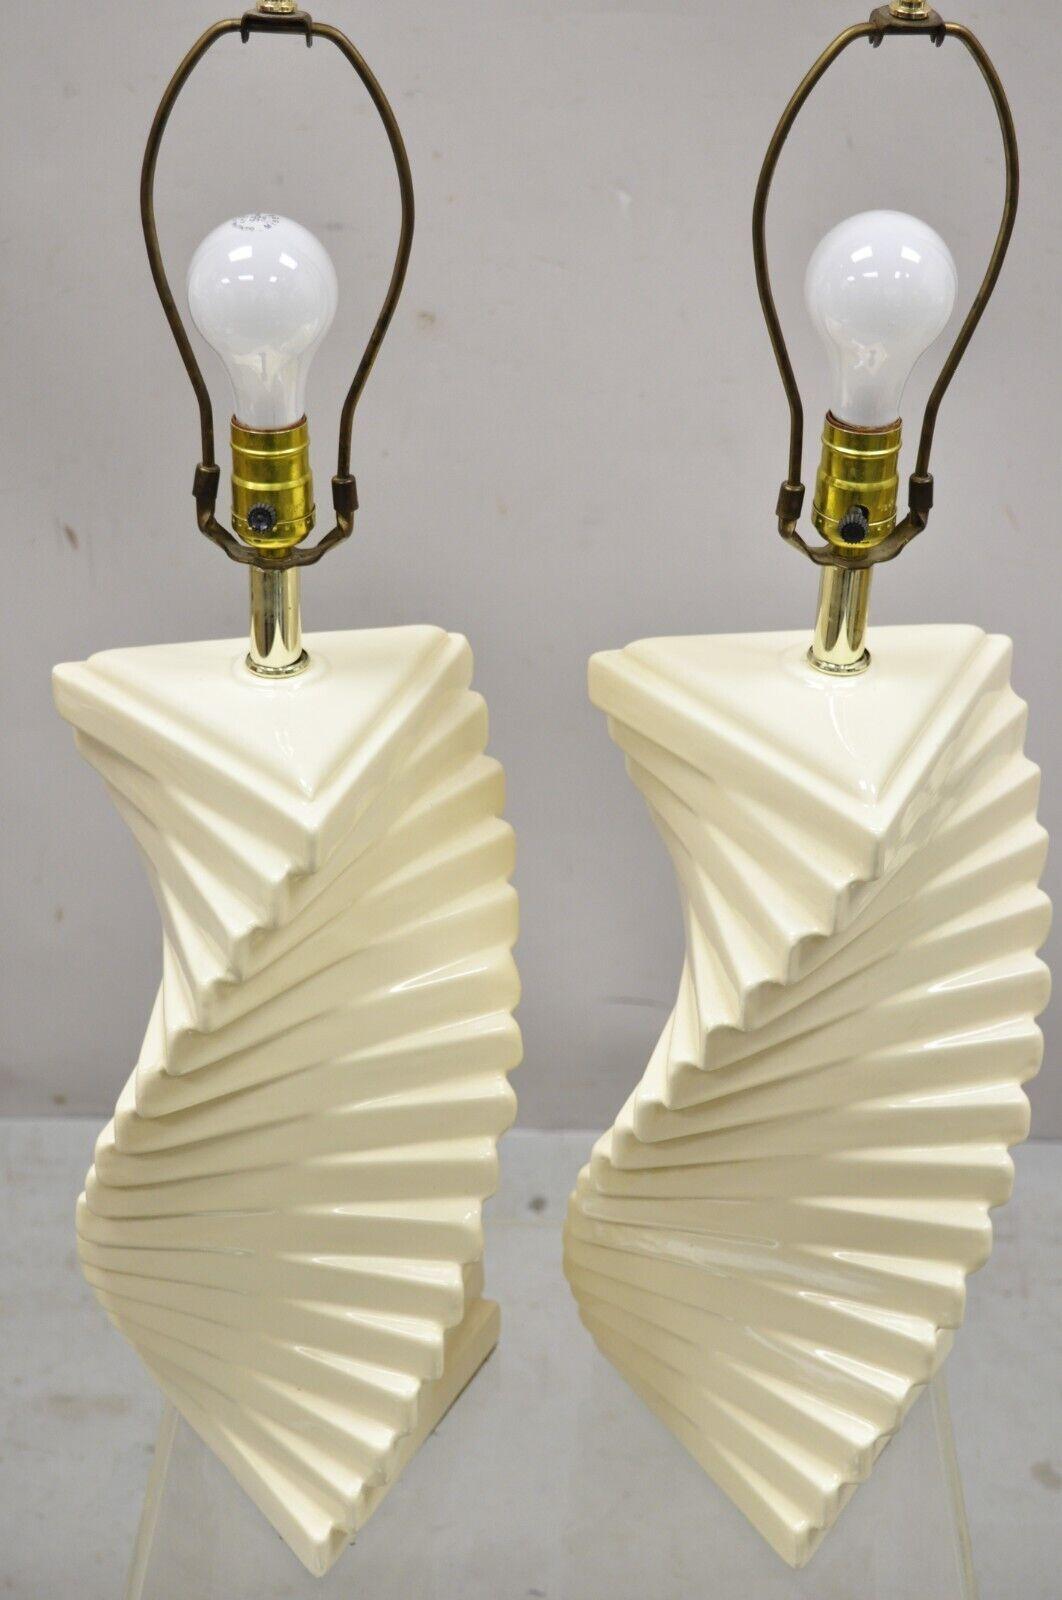 Pair of Vtg Hollywood Regency Beige Ceramic Helix Spiral Mid Century Table Lamps In Good Condition For Sale In Philadelphia, PA